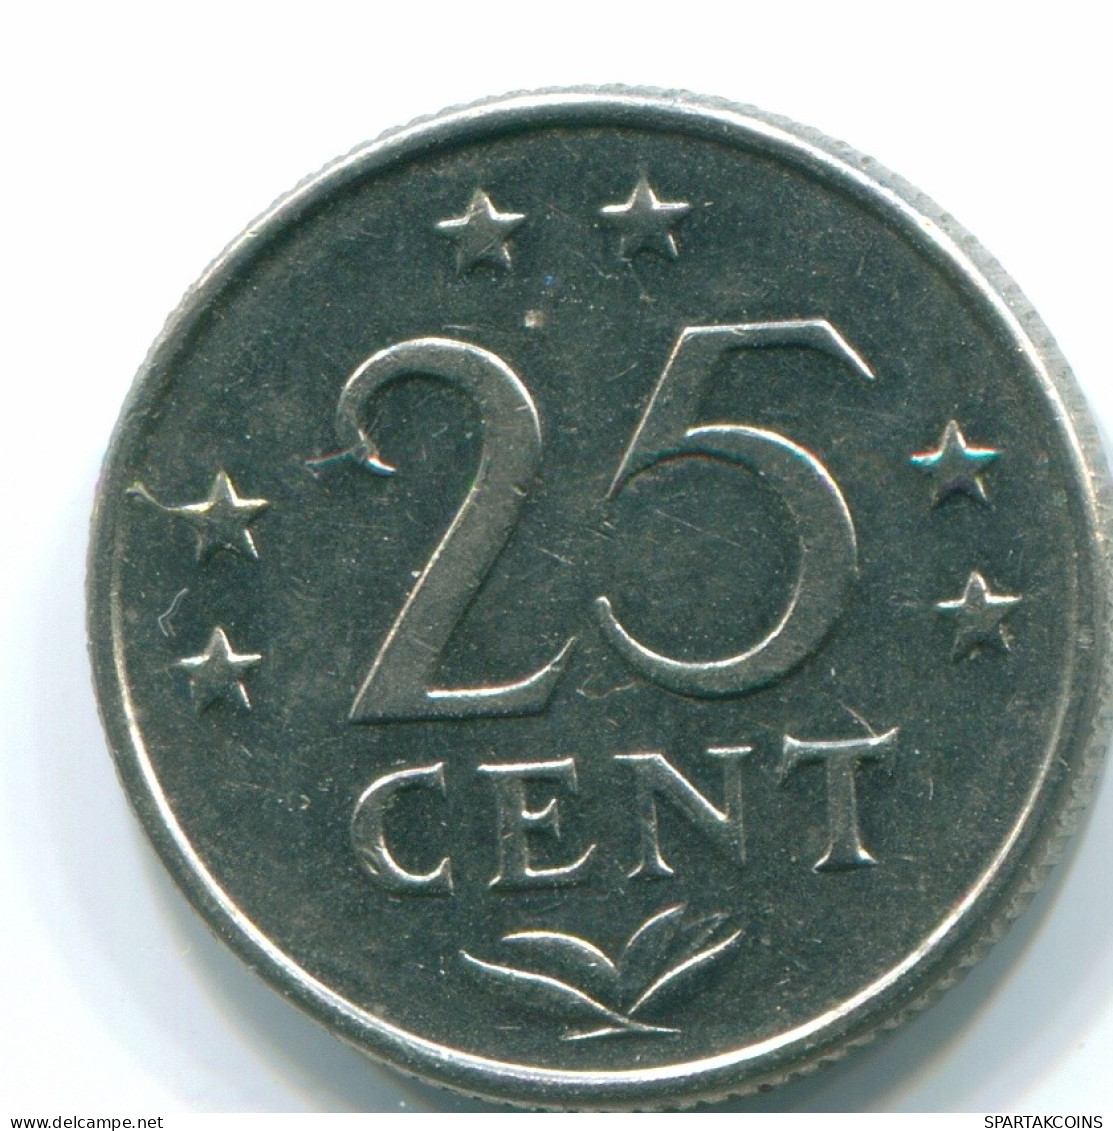 25 CENTS 1970 NETHERLANDS ANTILLES Nickel Colonial Coin #S11414.U.A - Netherlands Antilles